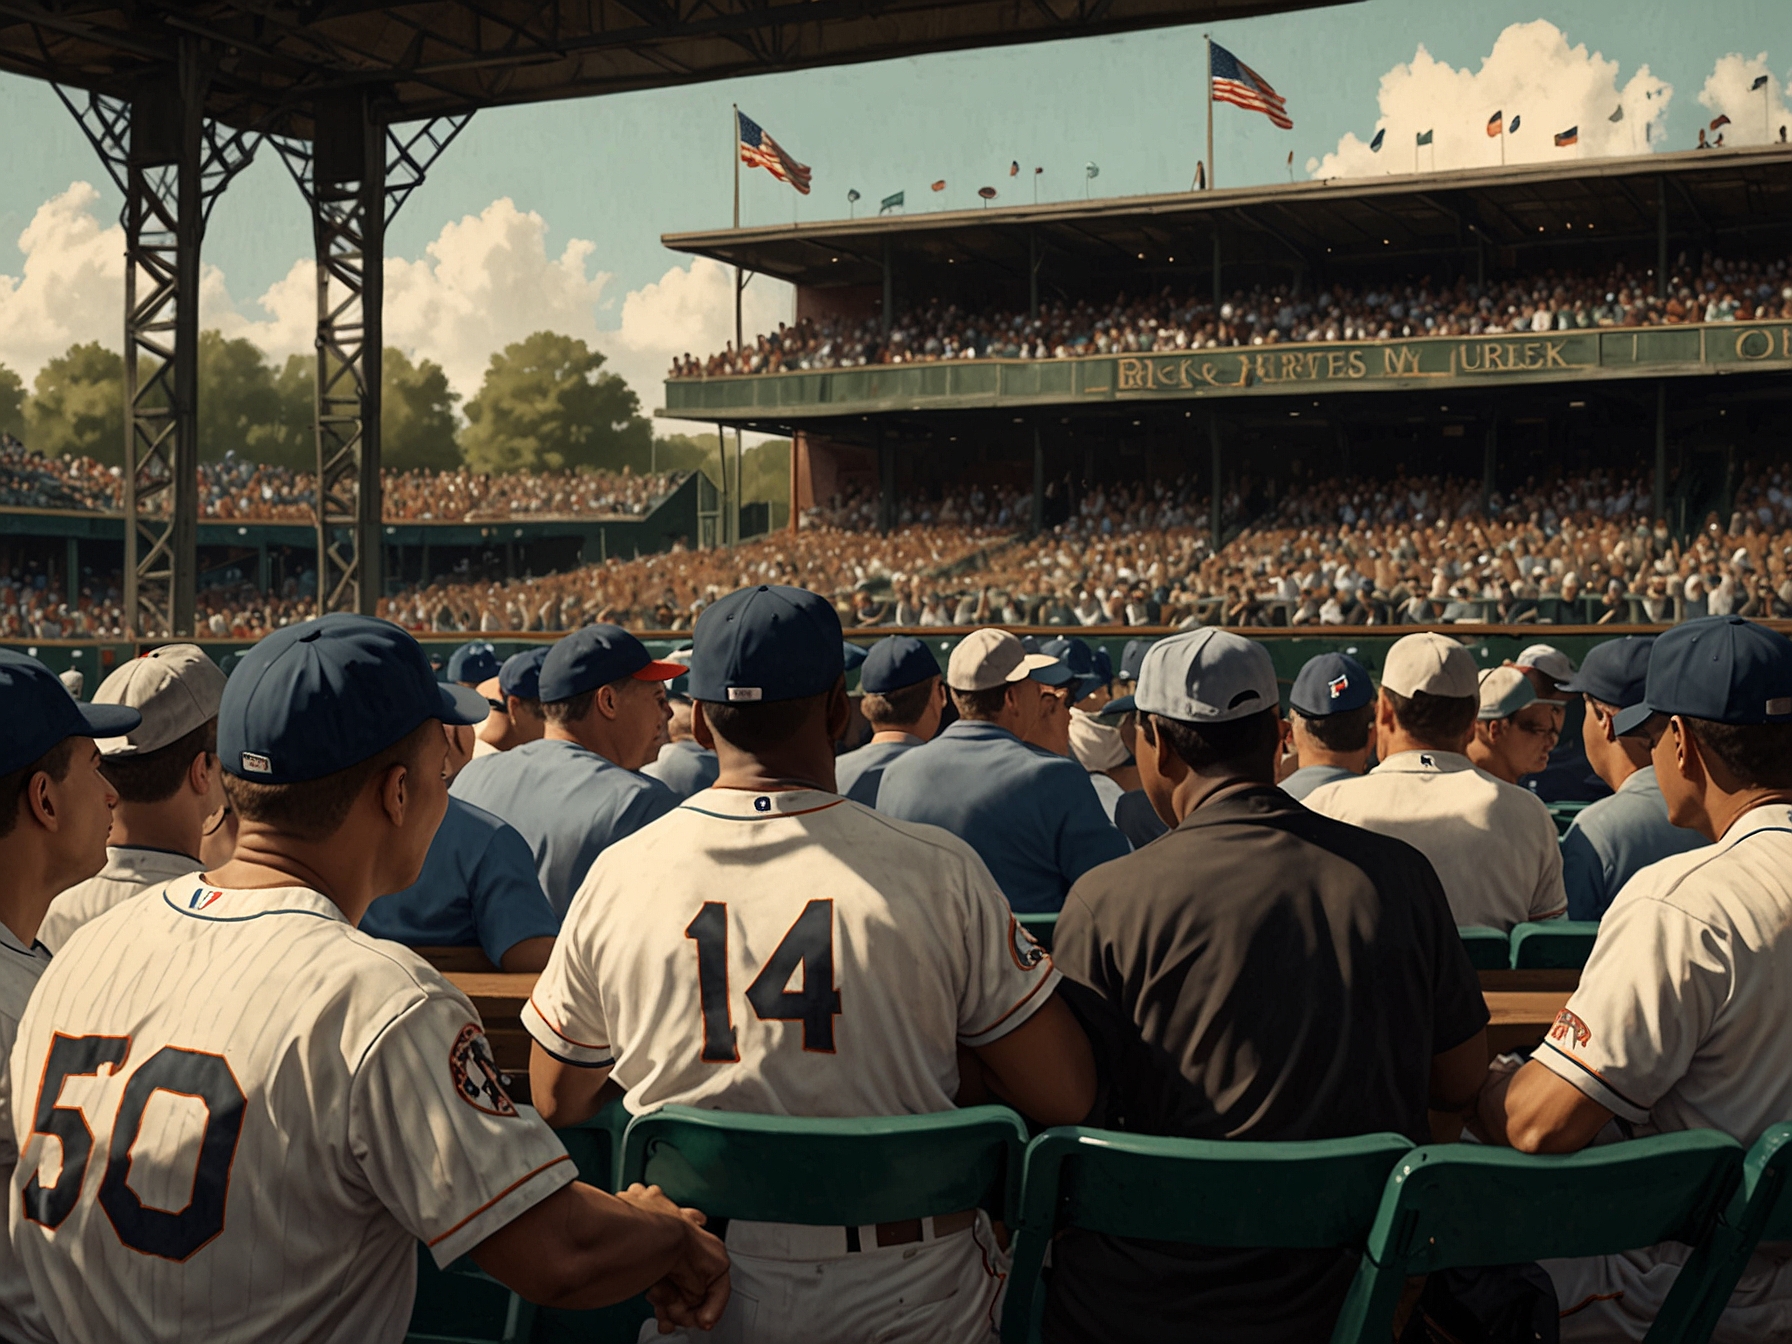 Fans and historians gather at the historic Rickwood Field, adorned with vintage decor, celebrating Willie Mays and his legacy in Major League Baseball.